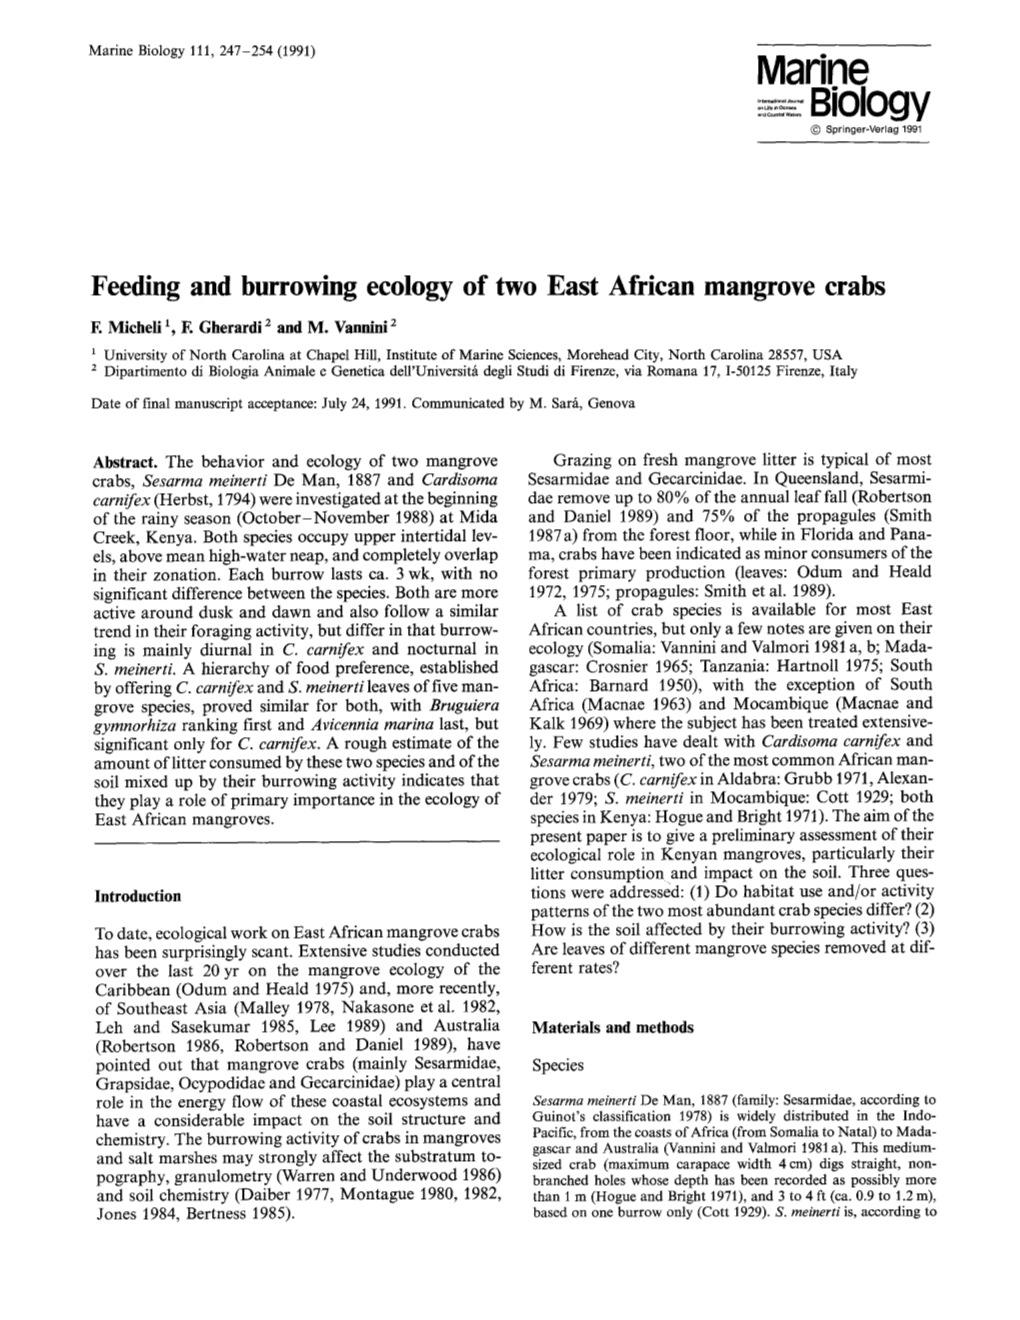 Feeding and Burrowing Ecology of Two East African Mangrove Crabs